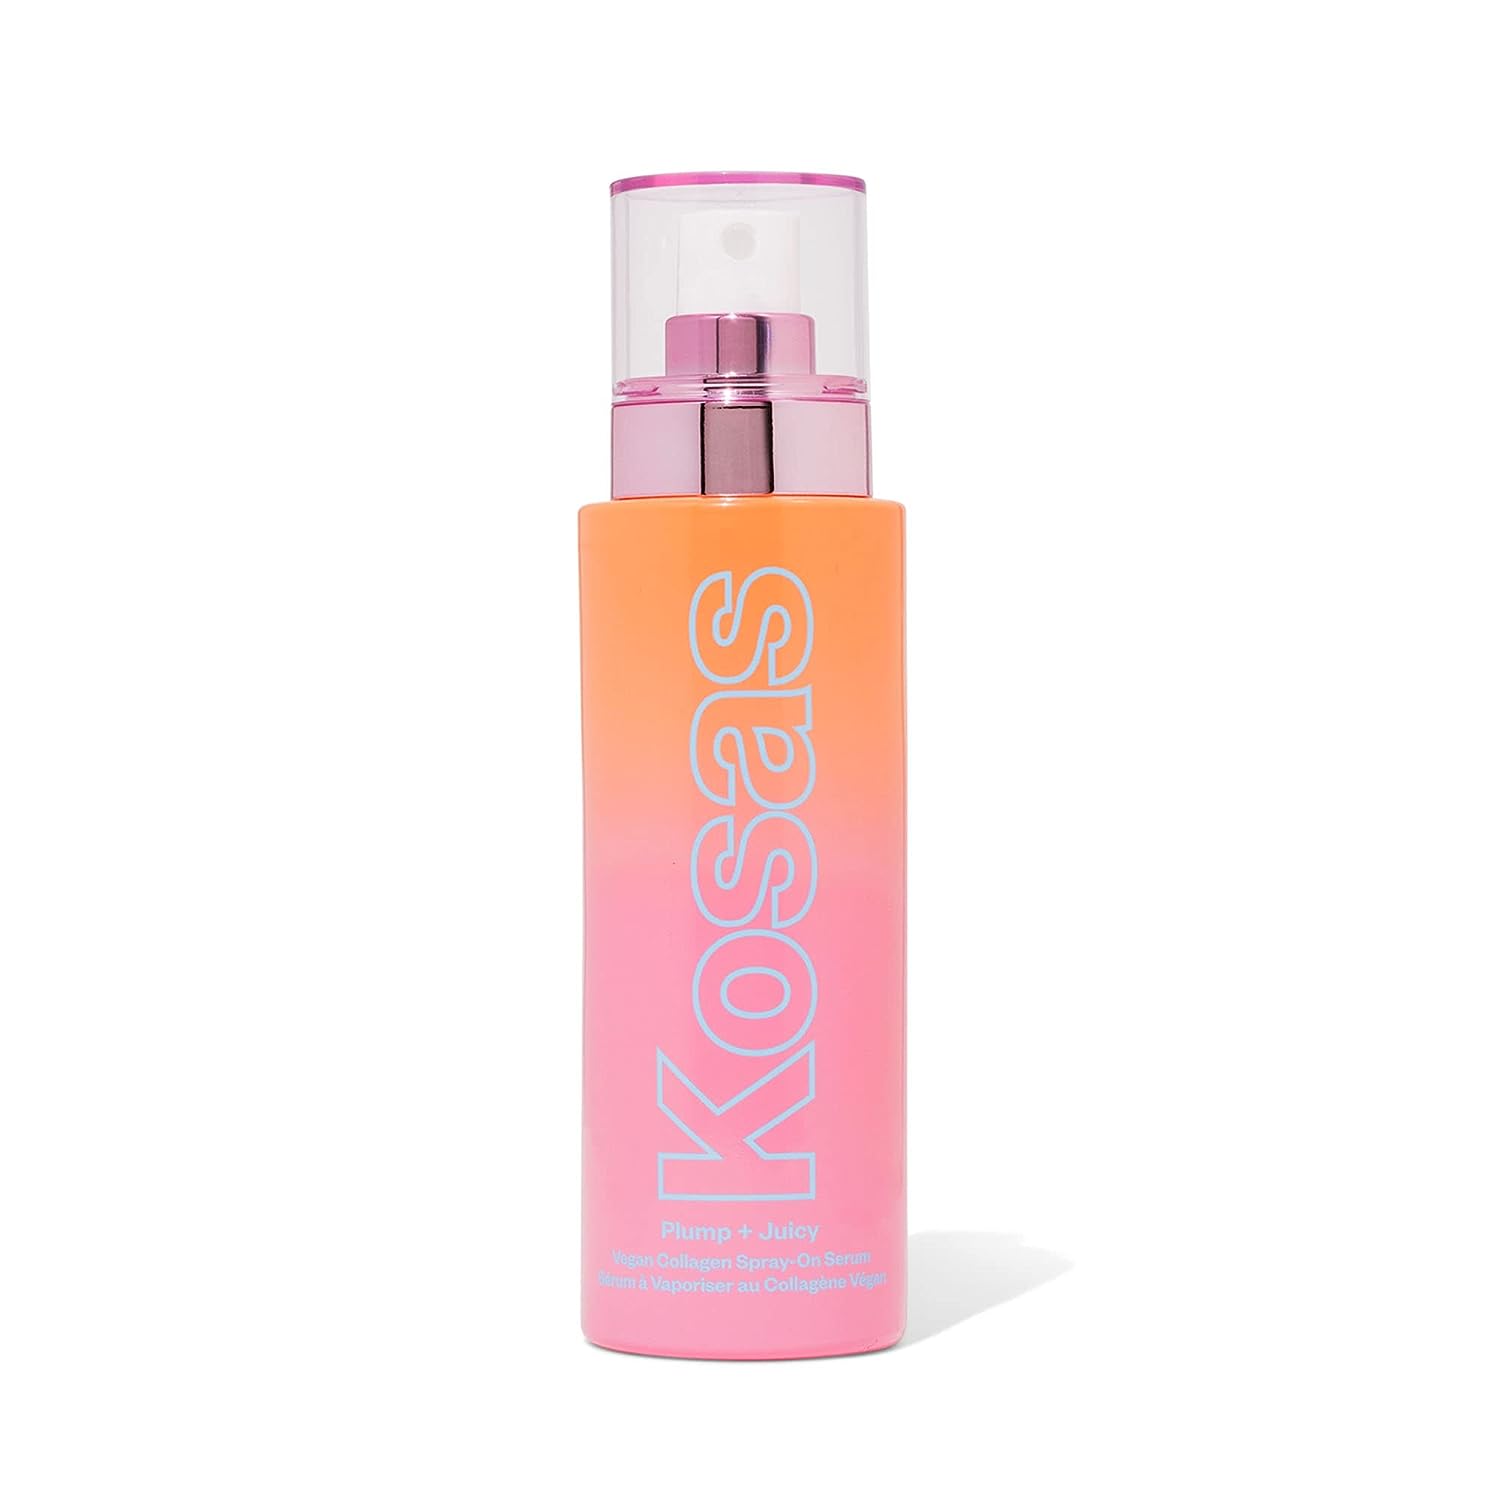 Kosas Plump and Juicy Vegan Collagen Spray - On Serum, Made in USA - Visibly firms, Soothes, and Hydrates the Skin